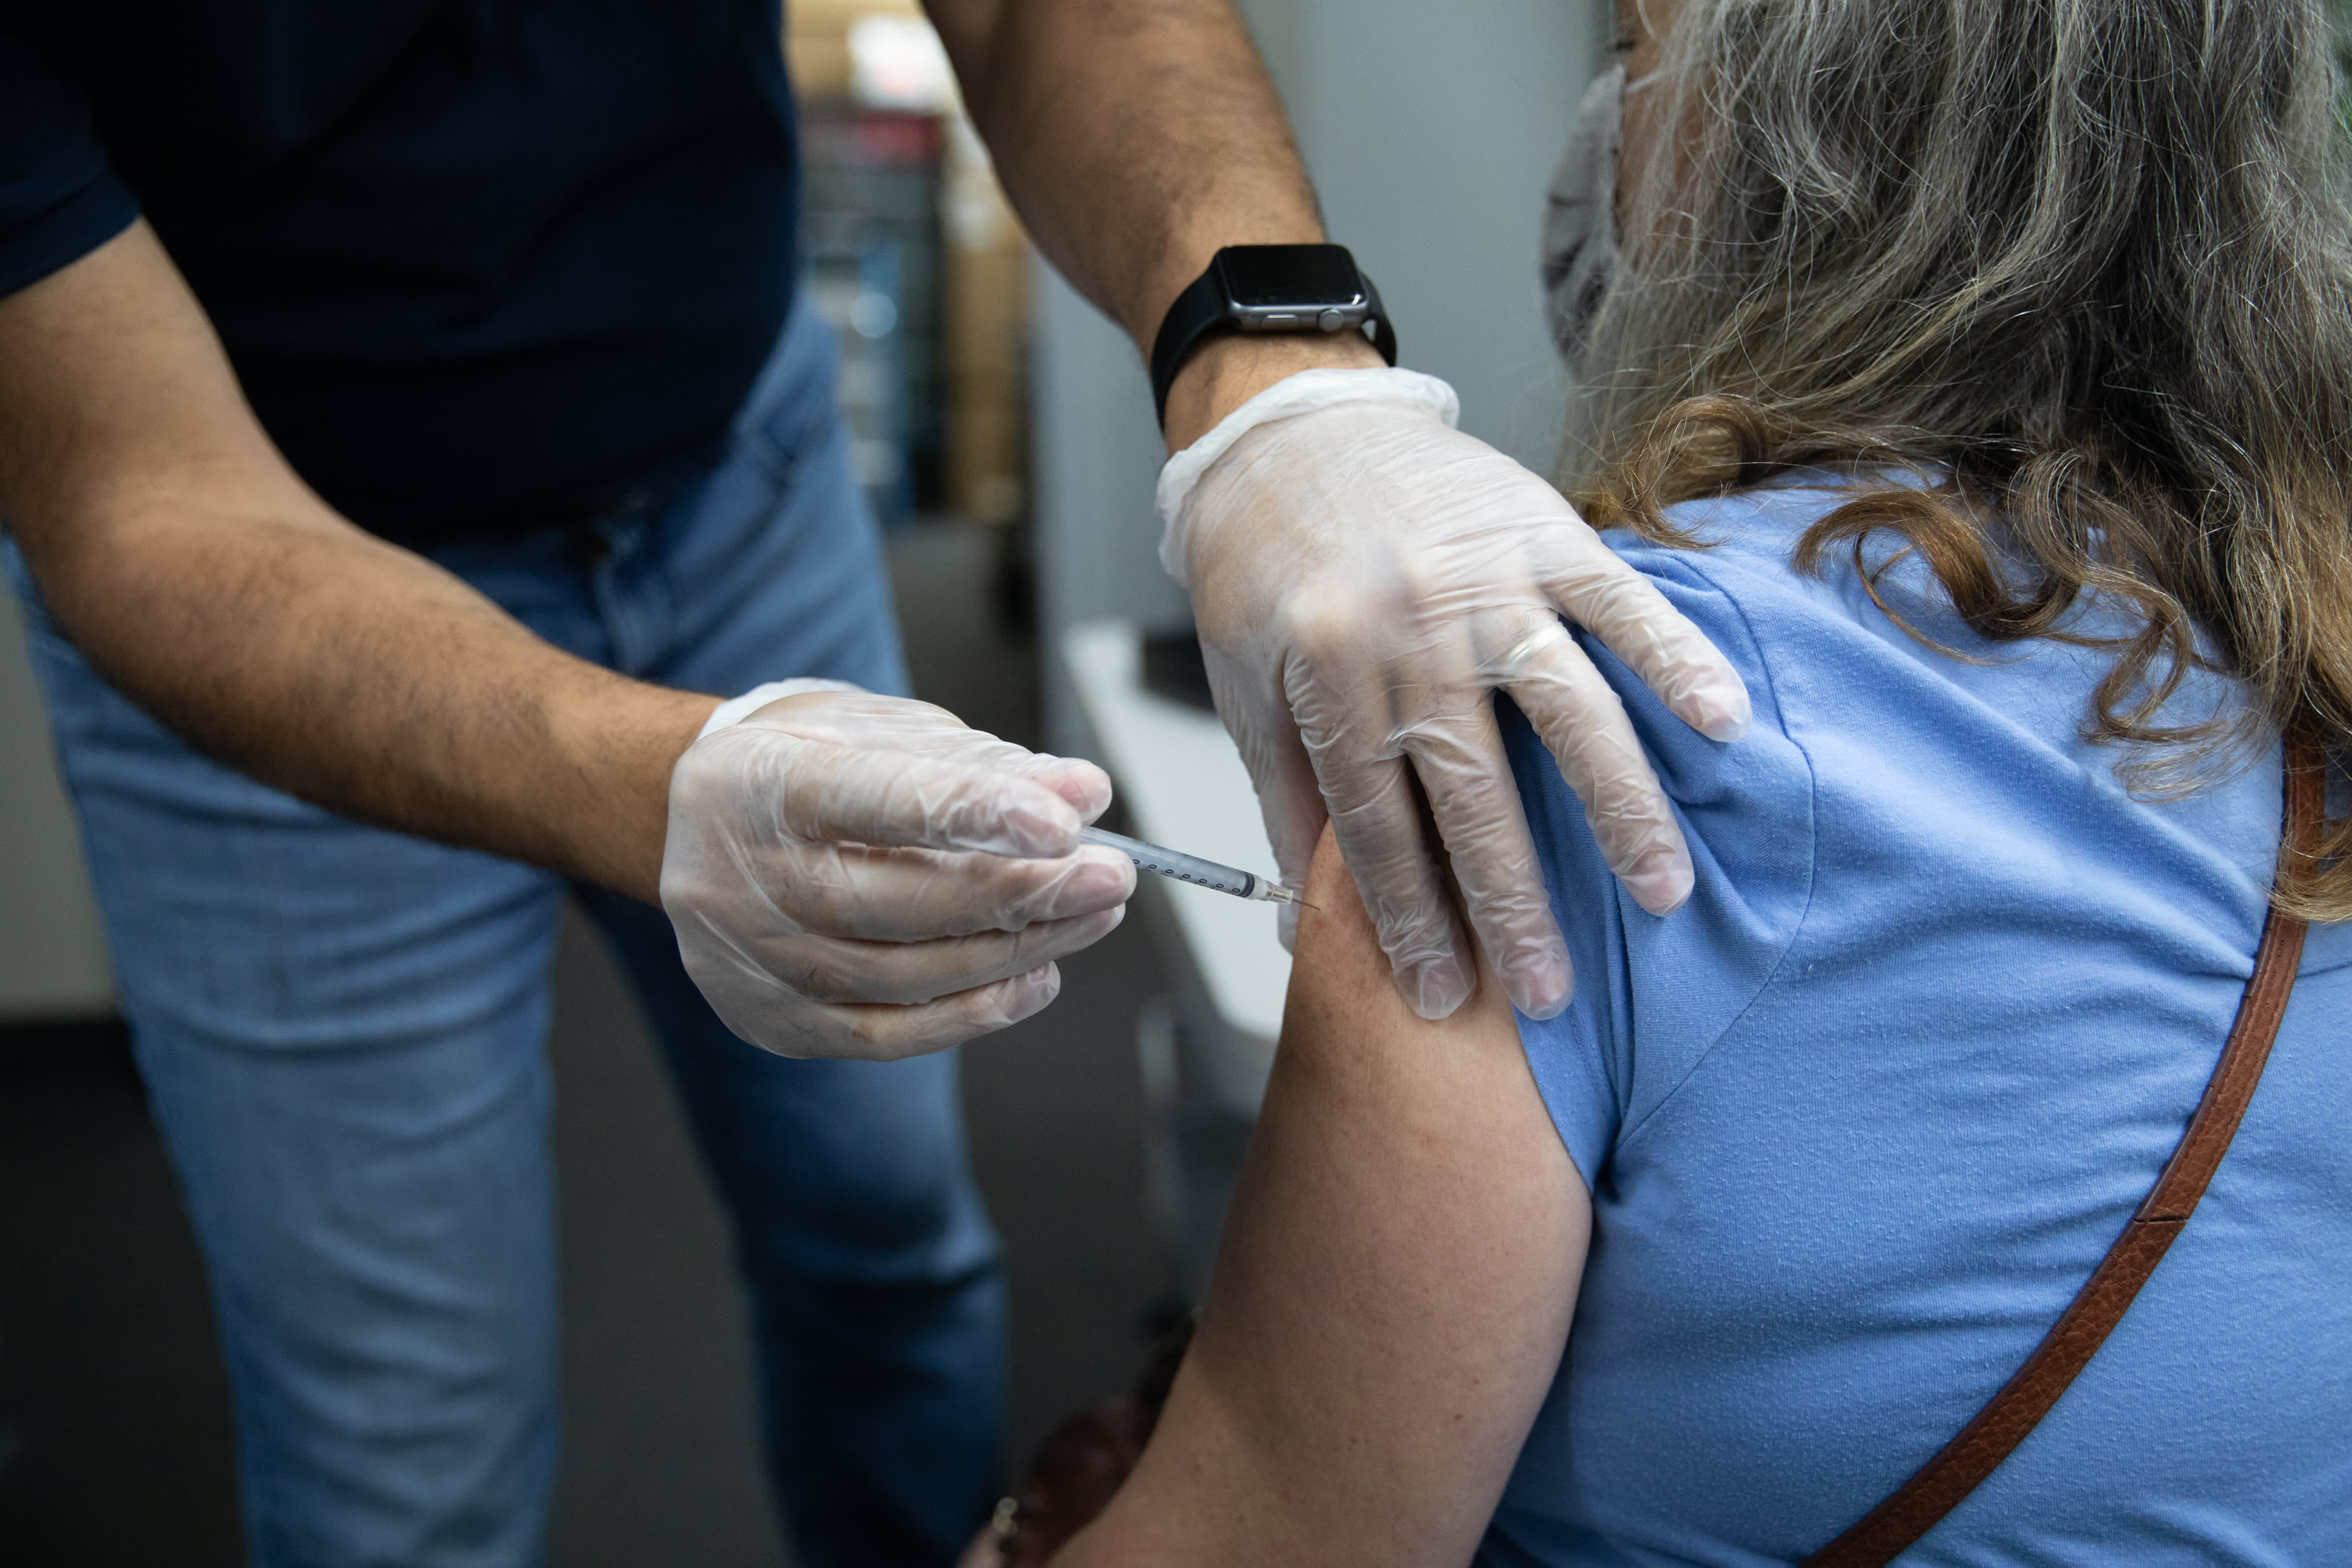 The United States will begin widely distributing Covid-19 booster shots next month as new data shows that vaccine protection wanes over time, top U.S.